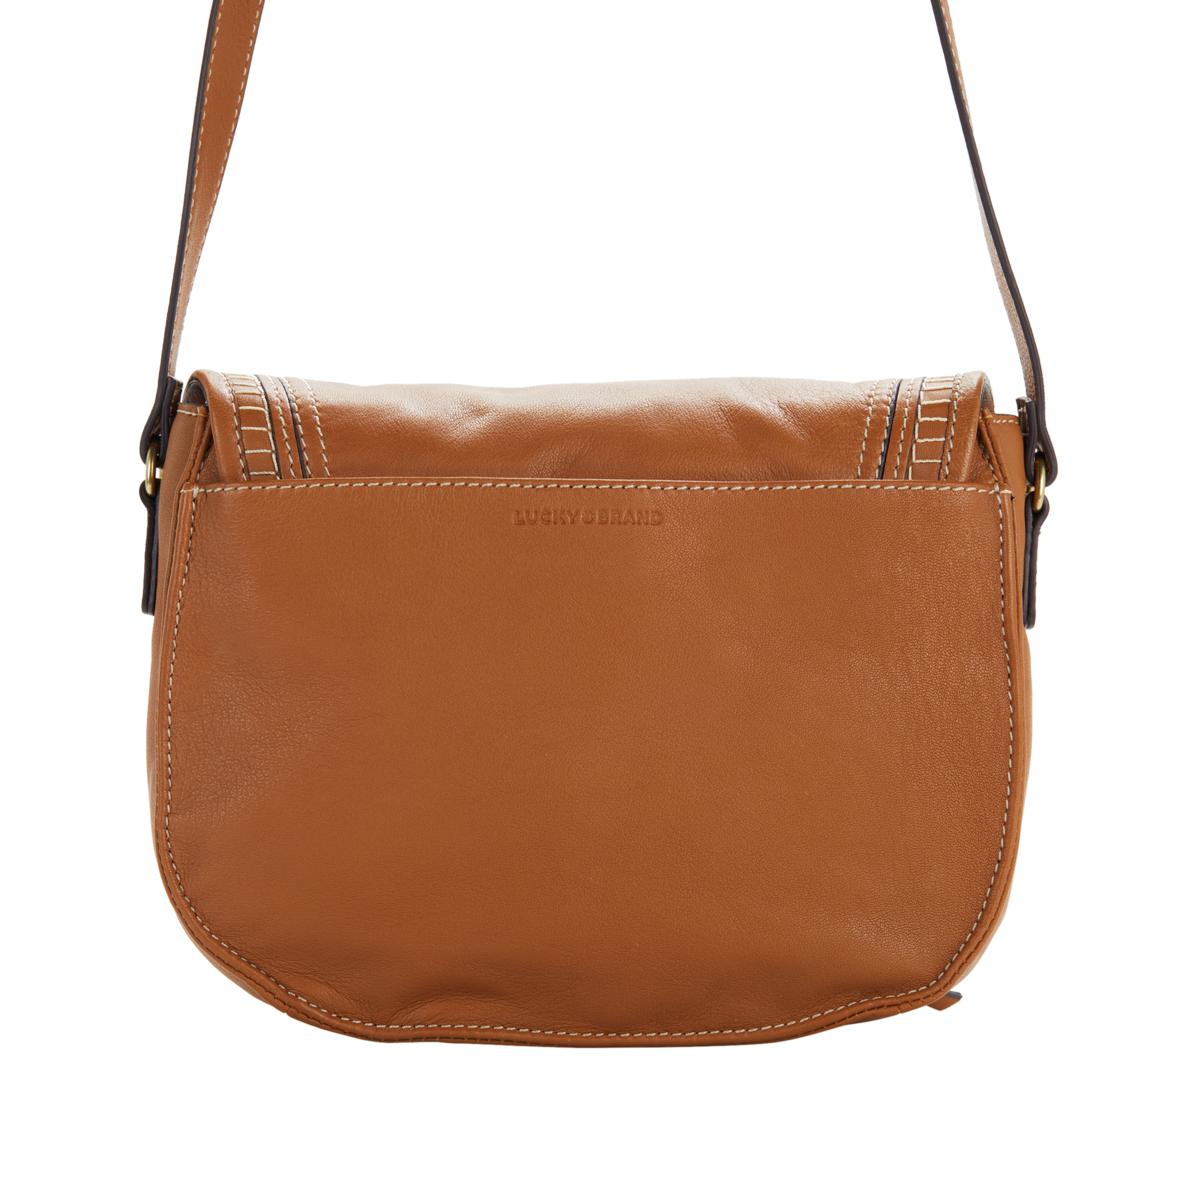 KISH Leather Ladies Small Hand Bag, For Casual Wear, 200gm